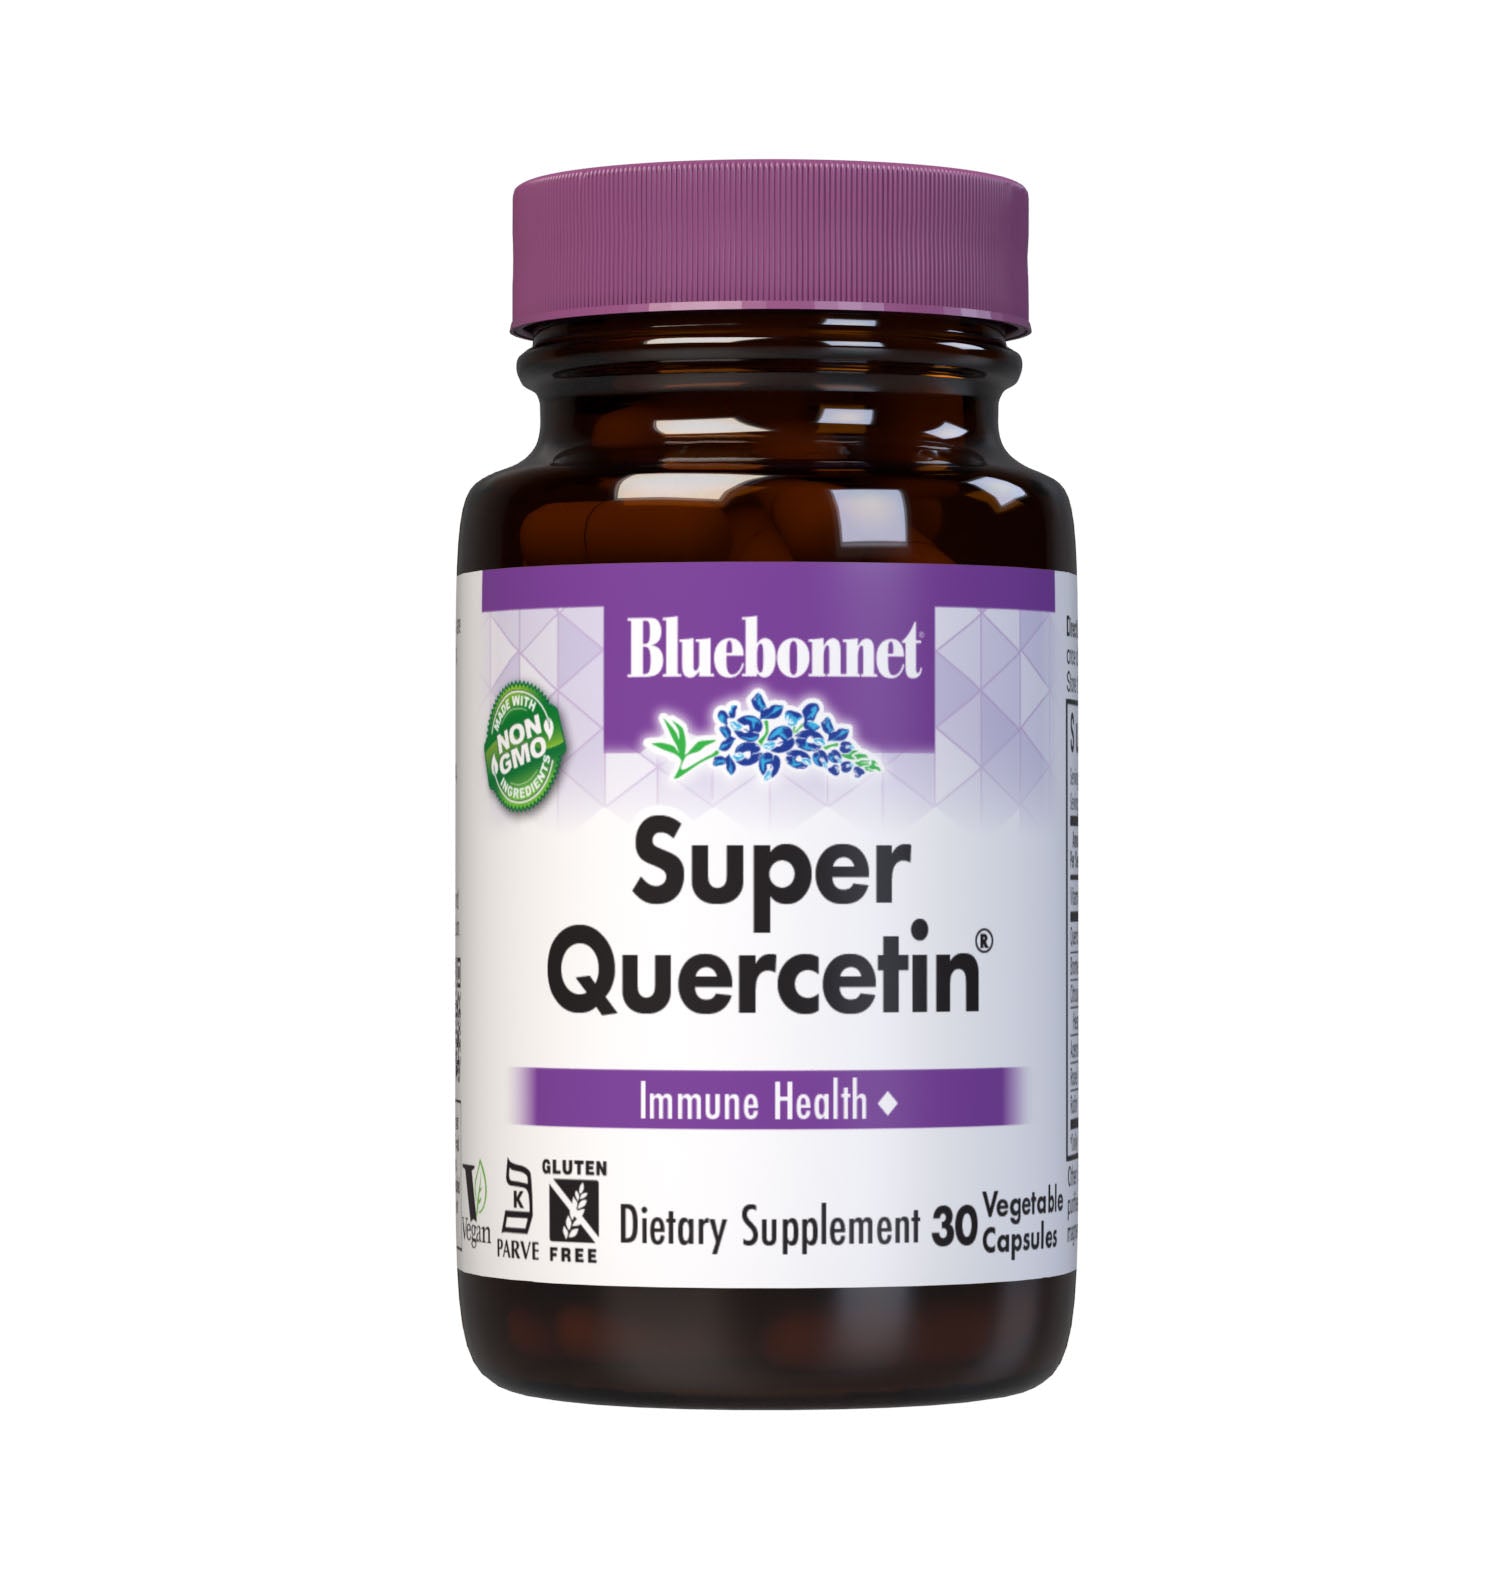 Bluebonnet’s Super Quercetin 30 Vegetable Capsules are specially formulated with a combination of quercetin, identity preserved (IP) vitamin C, rose hips, acerola, citrus bioflavonoids, hesperidin, rutin and pineapple bromelain to help support immune function. #size_30 count